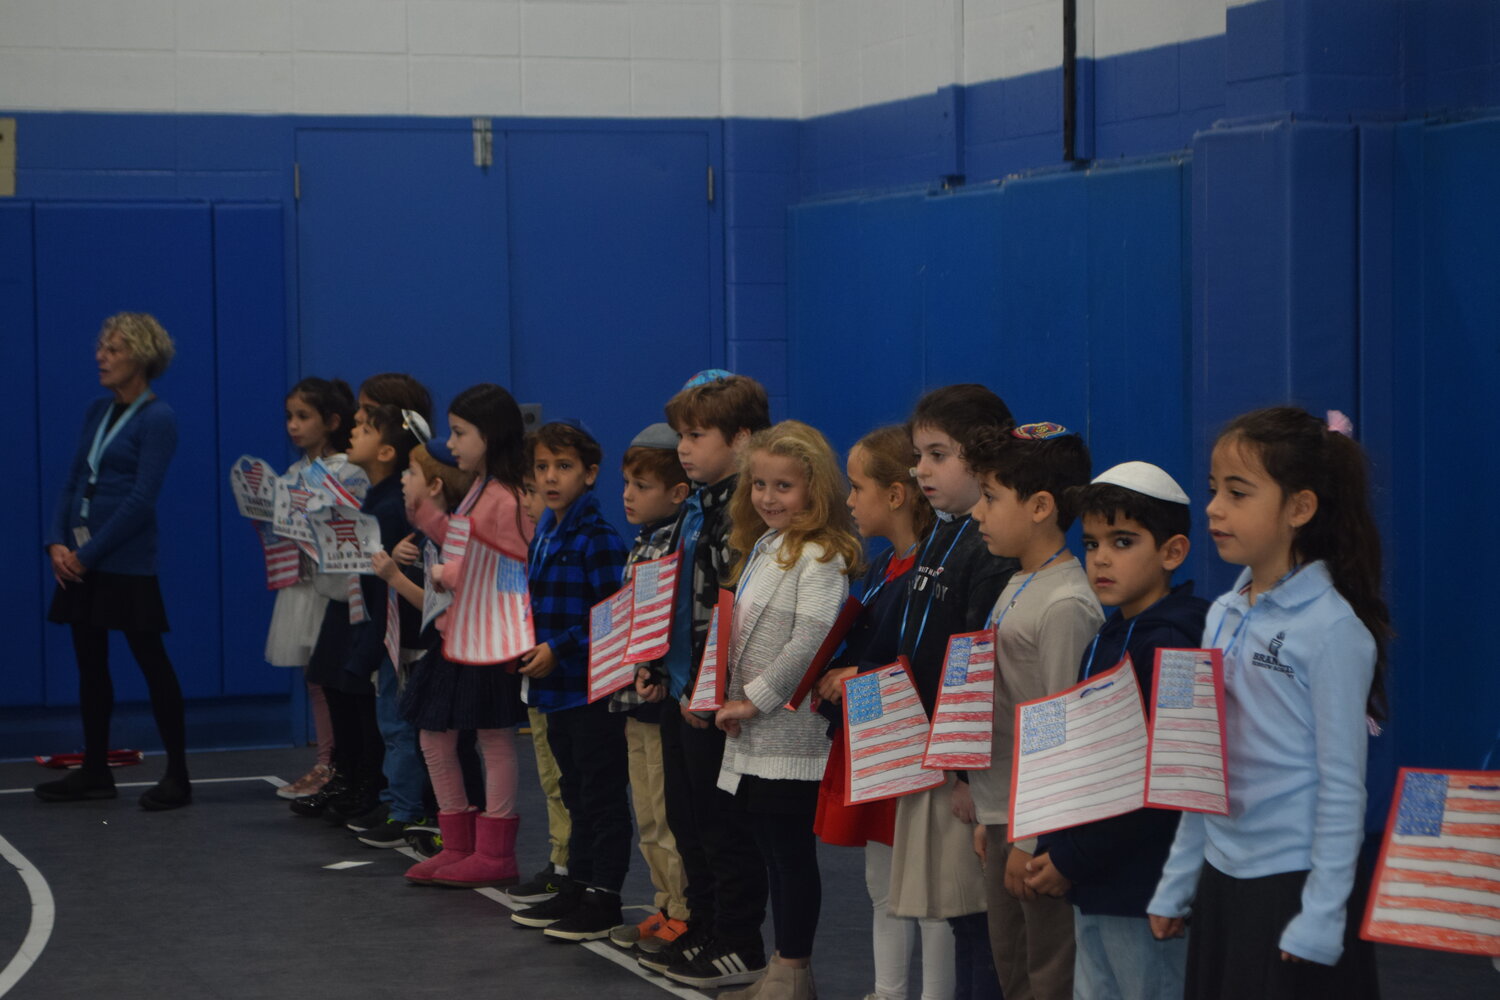 The Veterans Day program at Brandeis Hebrew Academy included the students singing patriotic songs and reciting the Pledge of Allegiance in honor of all the soldiers.